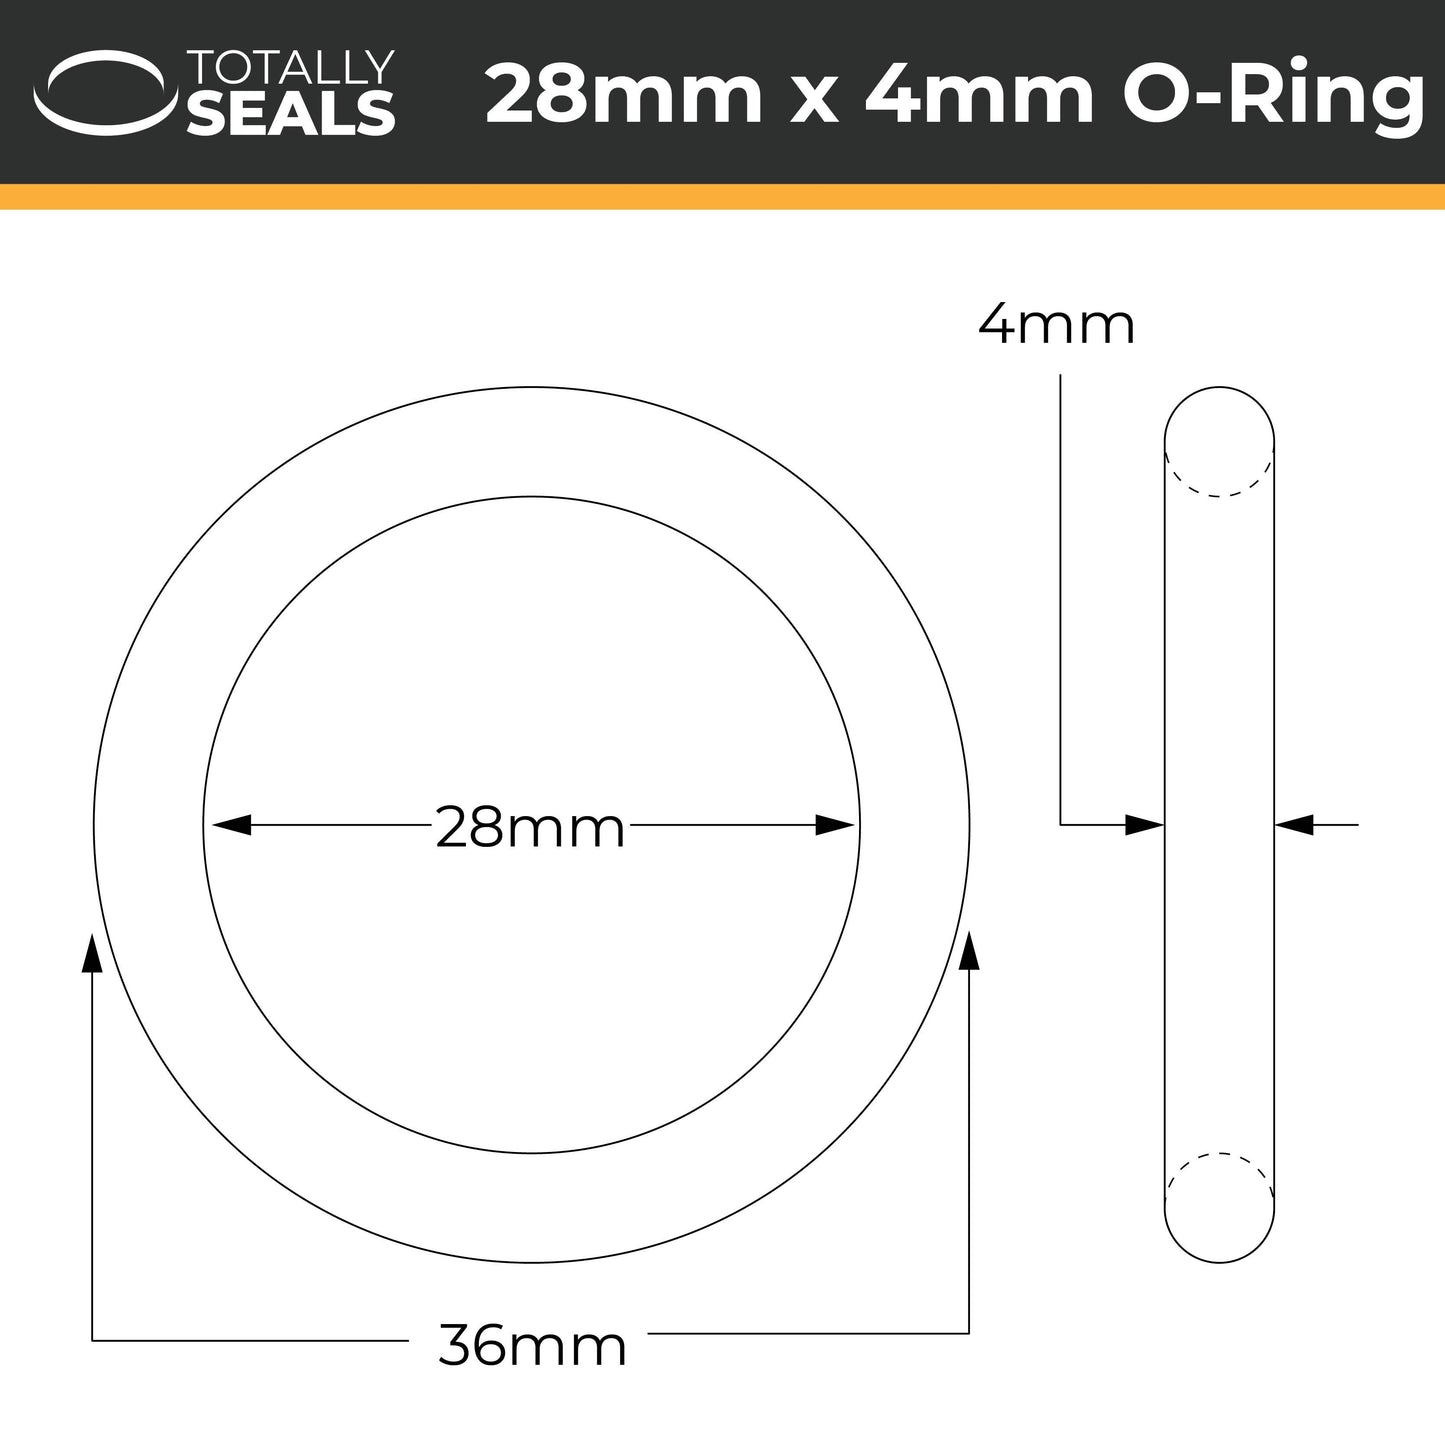 28mm x 4mm (36mm OD) Nitrile O-Rings - Totally Seals®